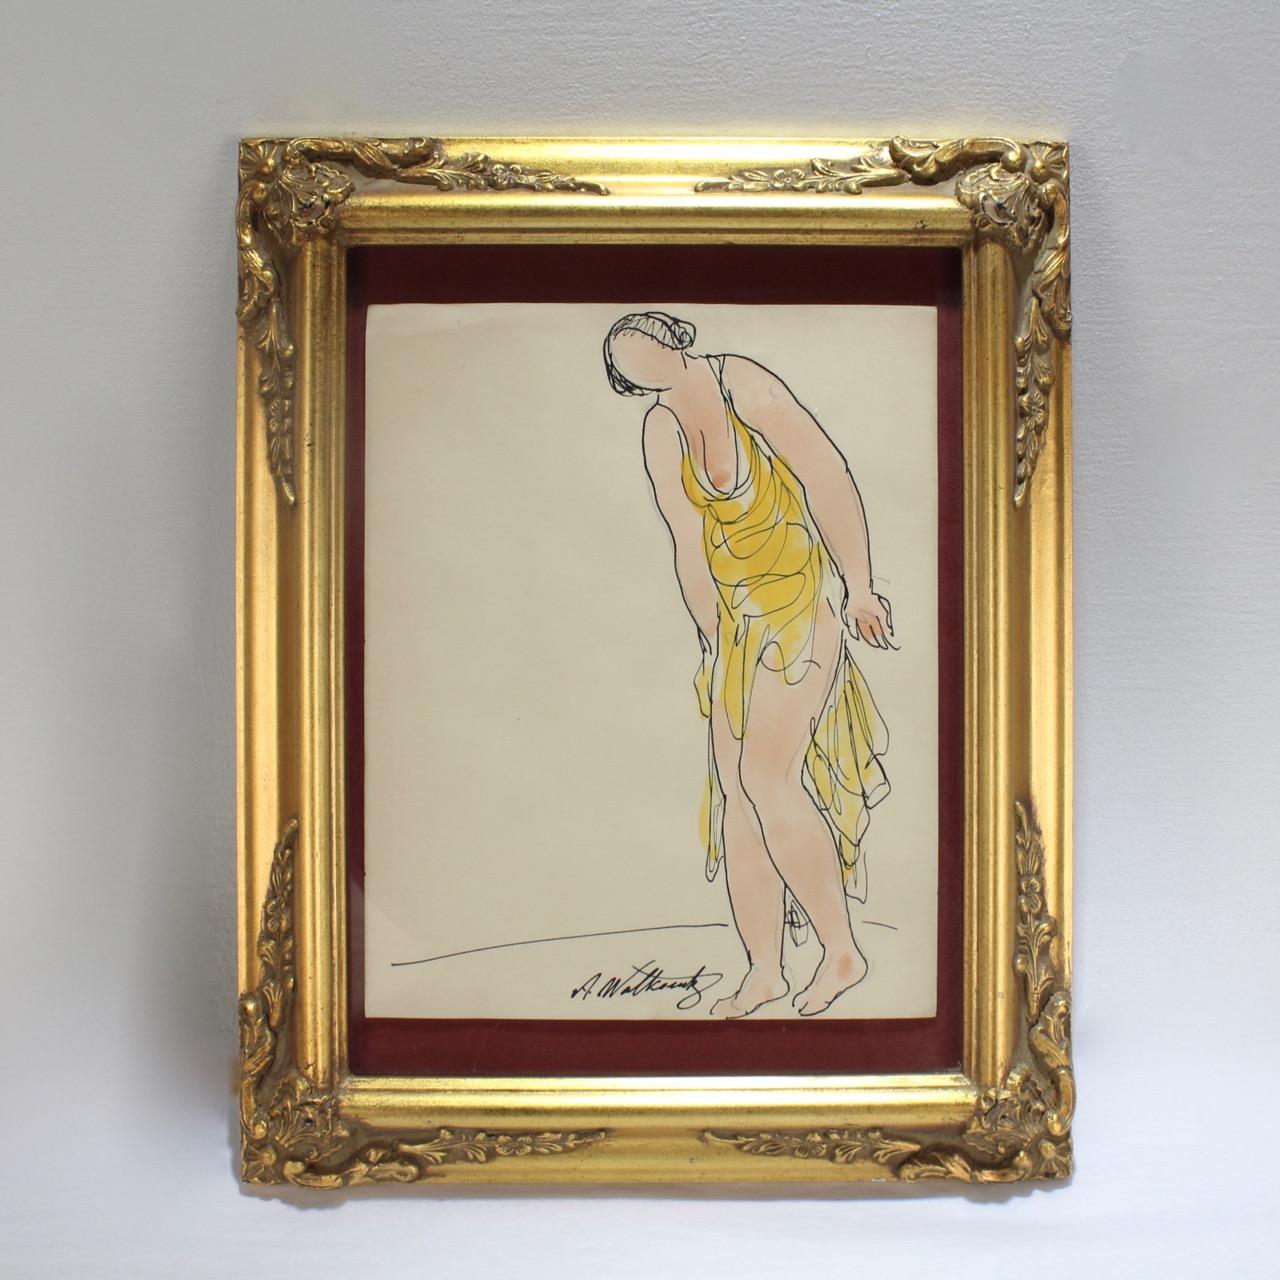 A fine drawing in ink and watercolor on paper of the modernist dancer Isadora Duncan by Abraham Walkowitz. 

Walkowitz (1878-1965) had an intimate artistic relationship with Duncan. He drew her in dance literally thousands of times. 

This image